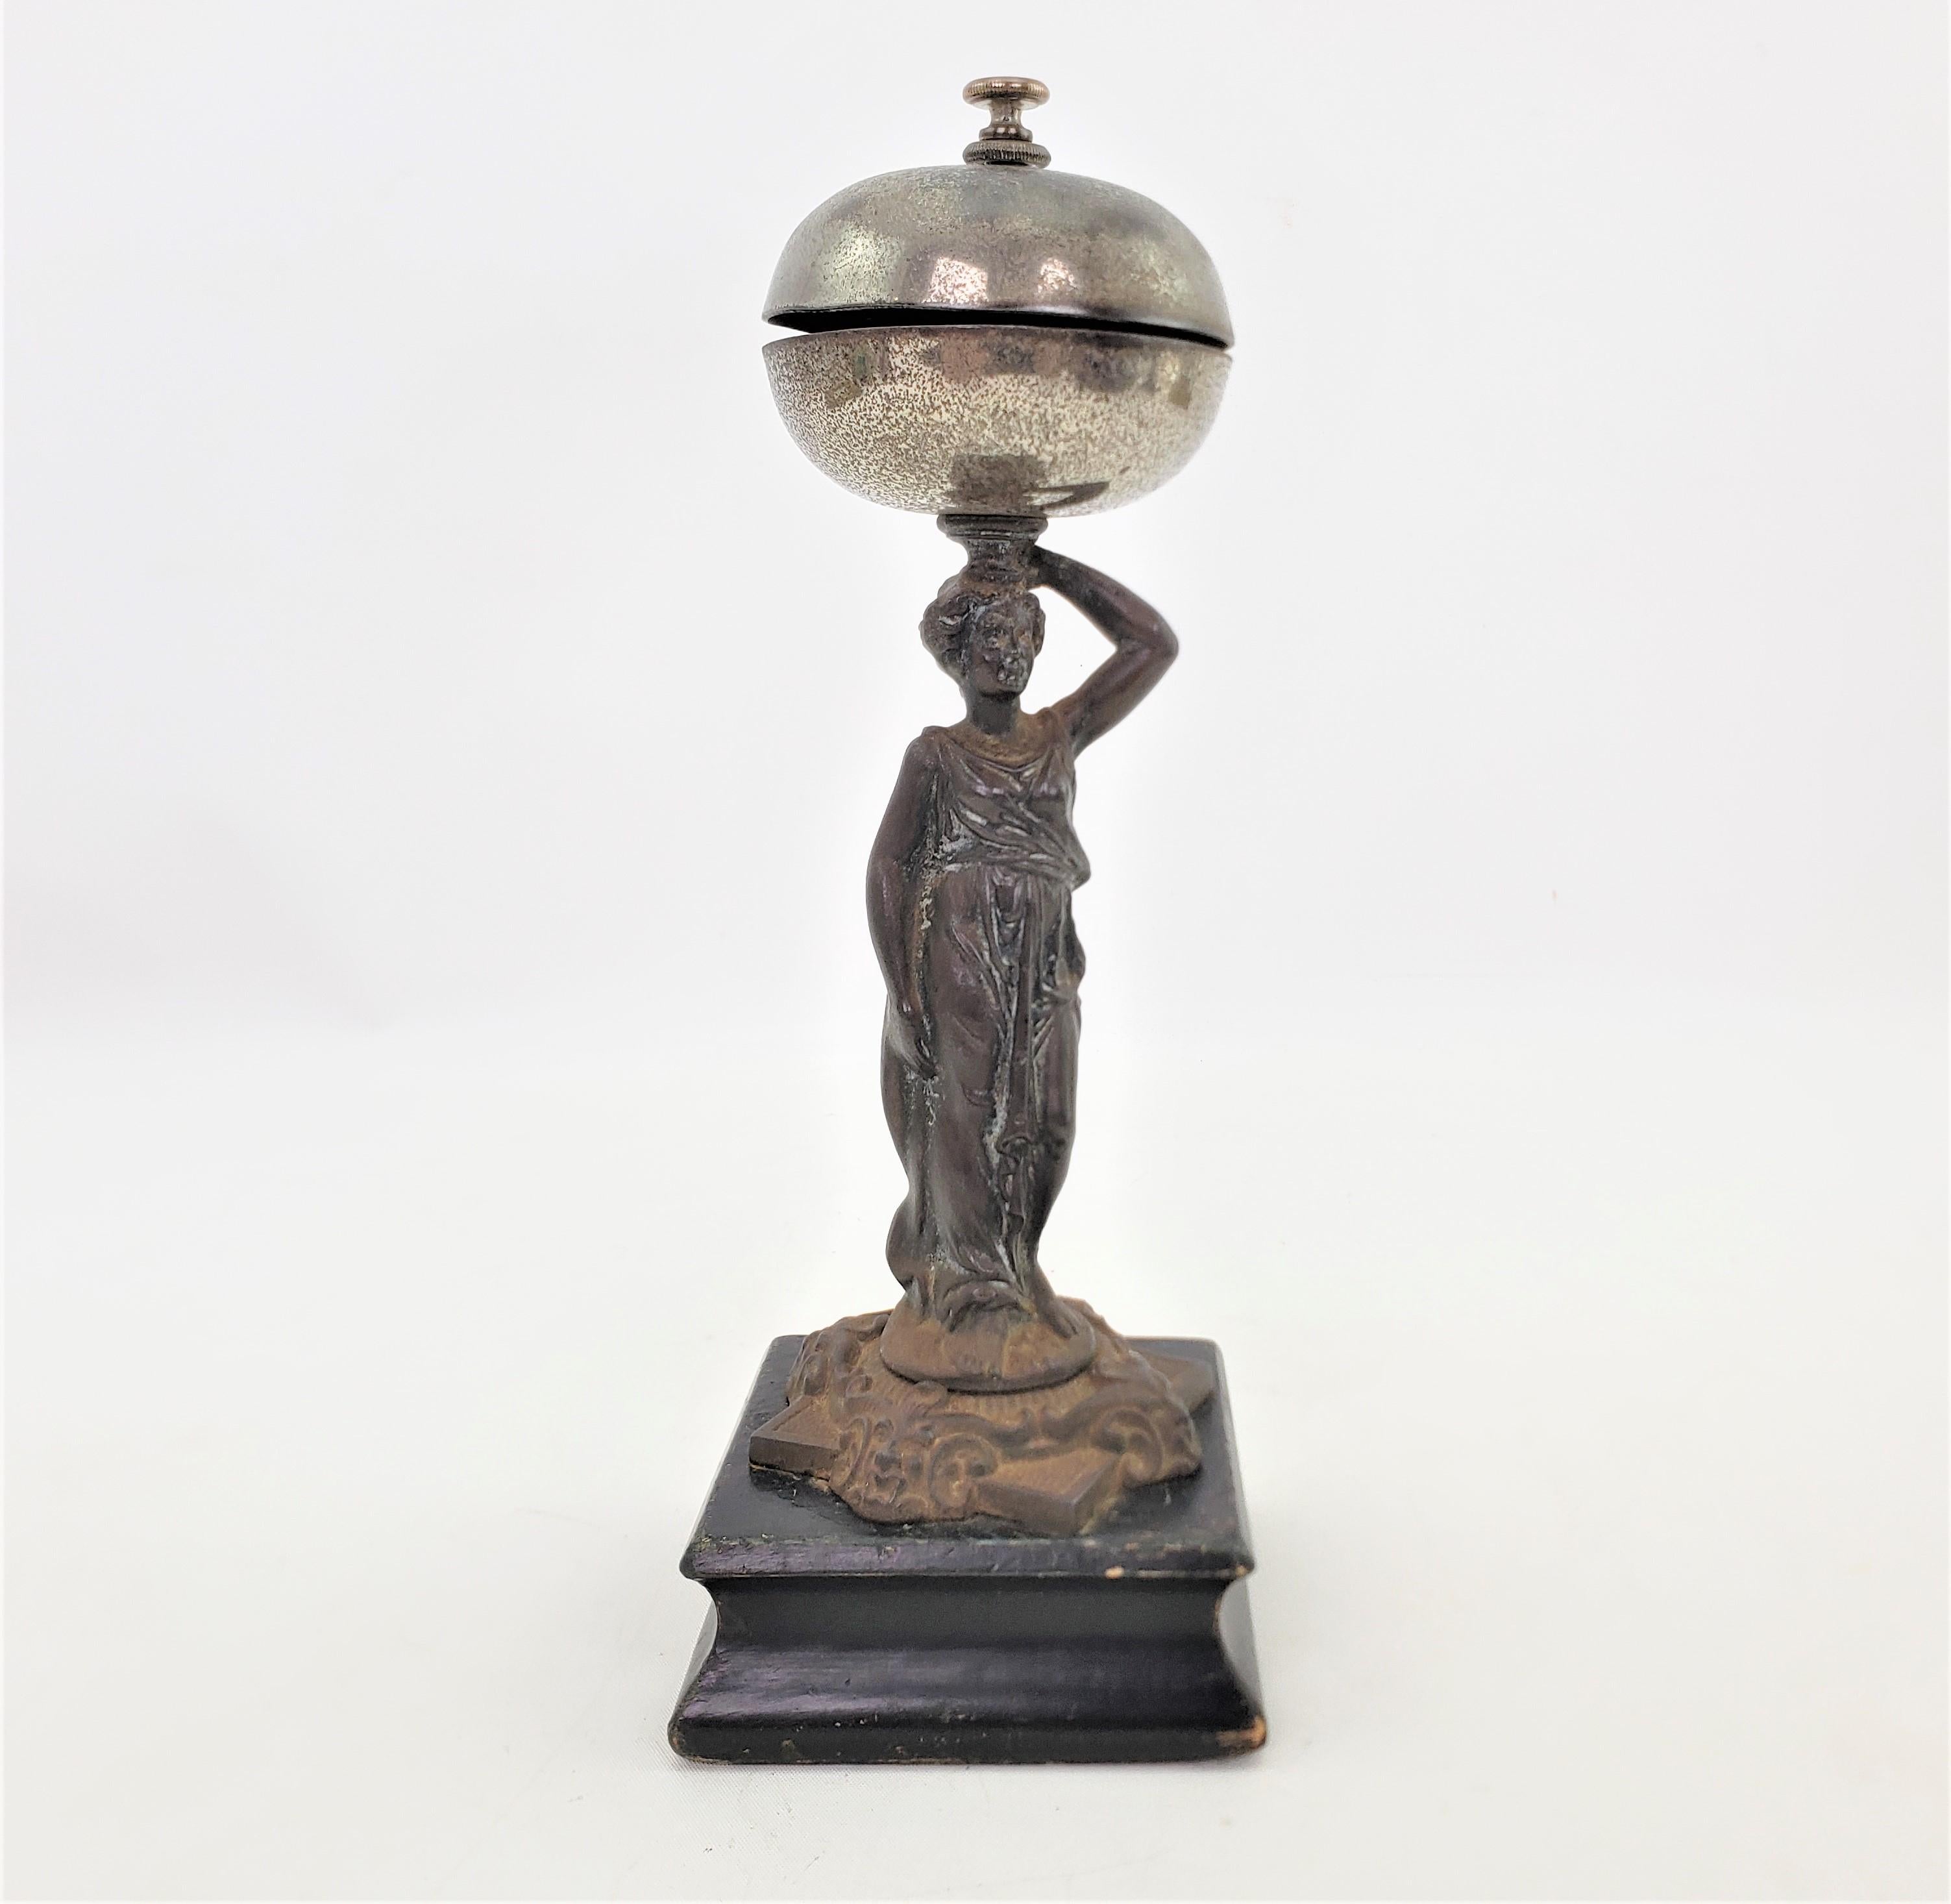 This antique dinner or service counter bell is unsigned, but presumed to have originated from England and date to approximately 1900 and done in the period Edwardian style. The bell features a cast metal robed female holding up and two piece plated